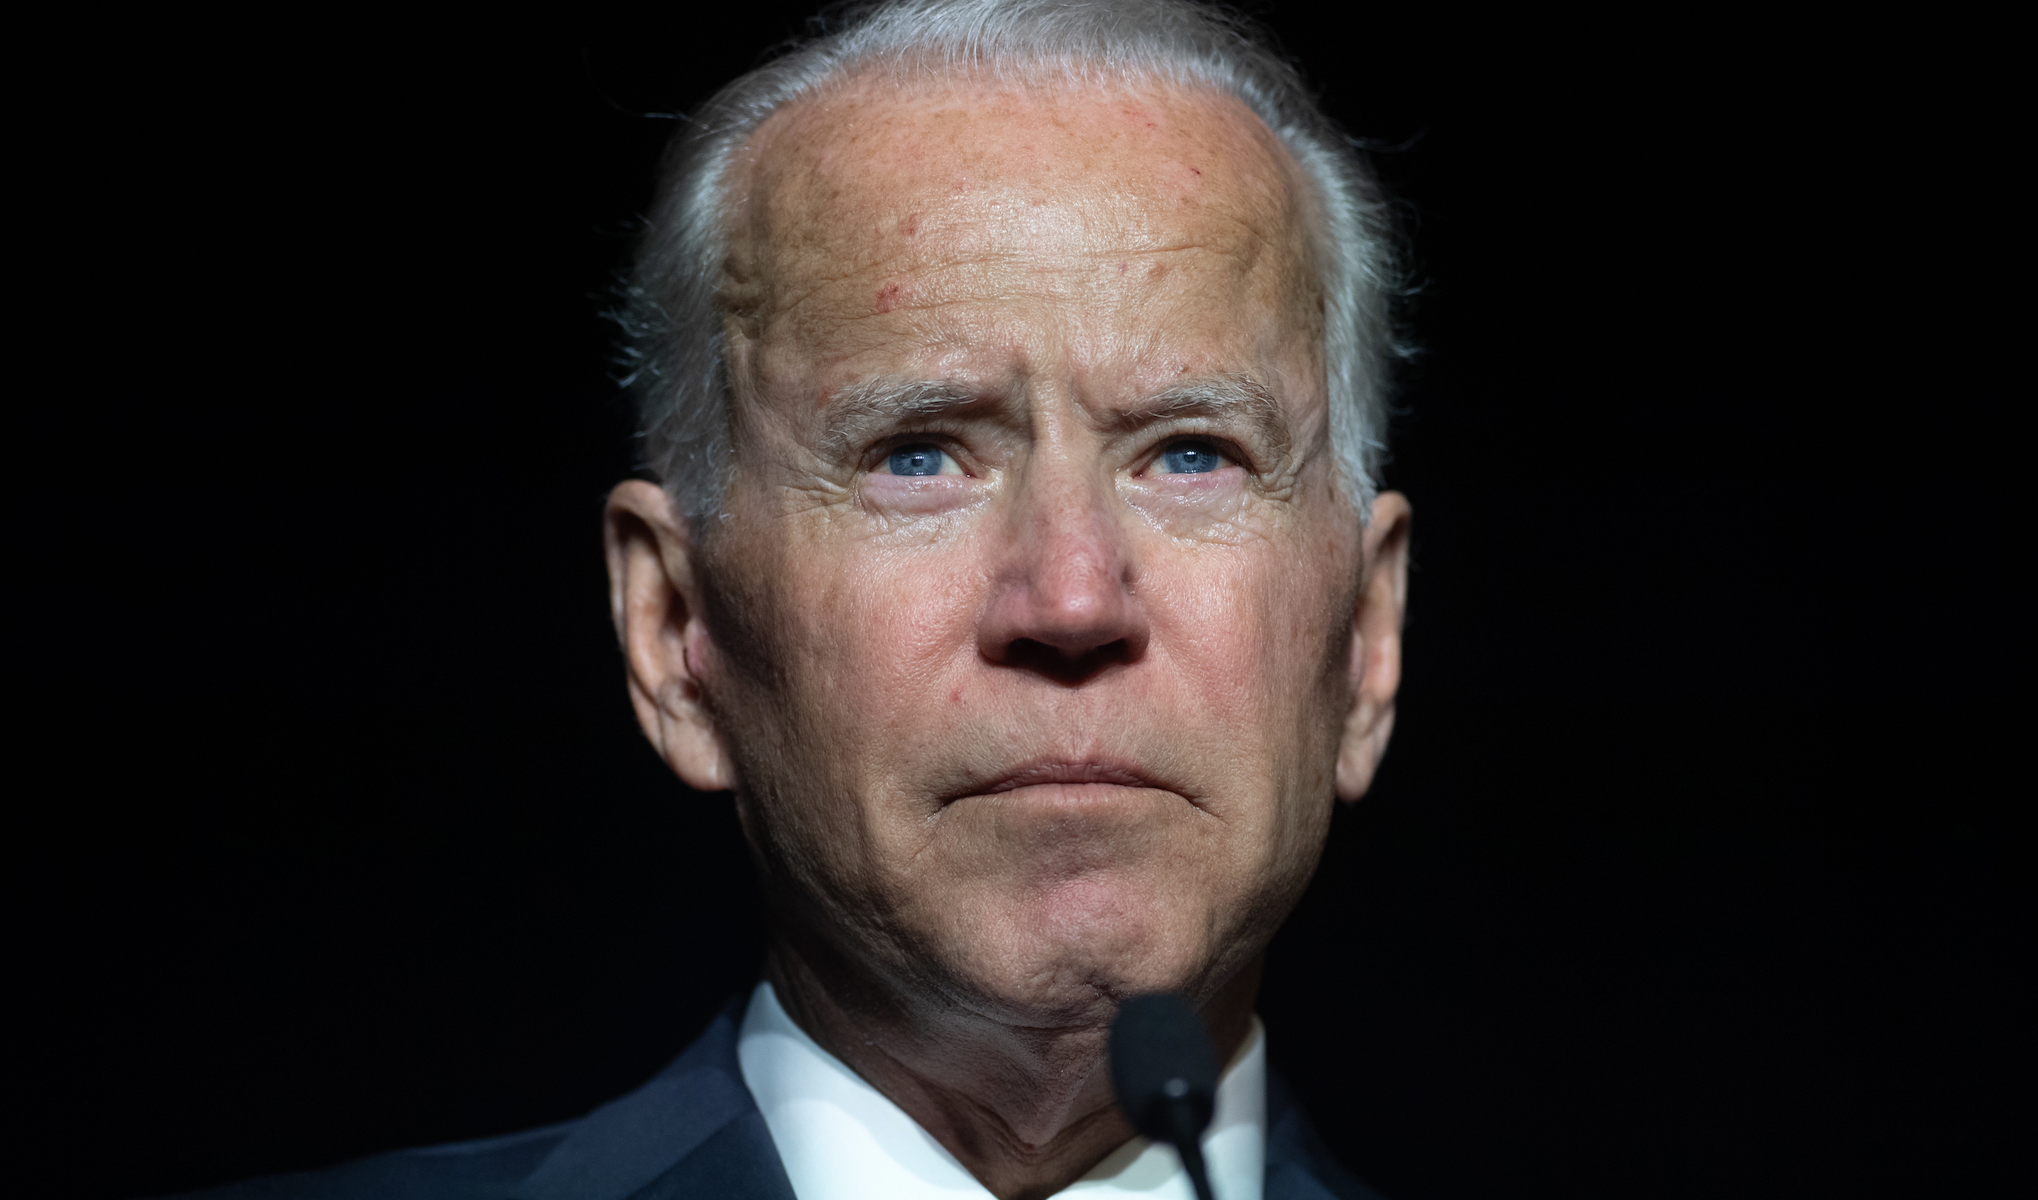 Biden Signs Executive Order To Aid Women Crossing State Lines For Abortions